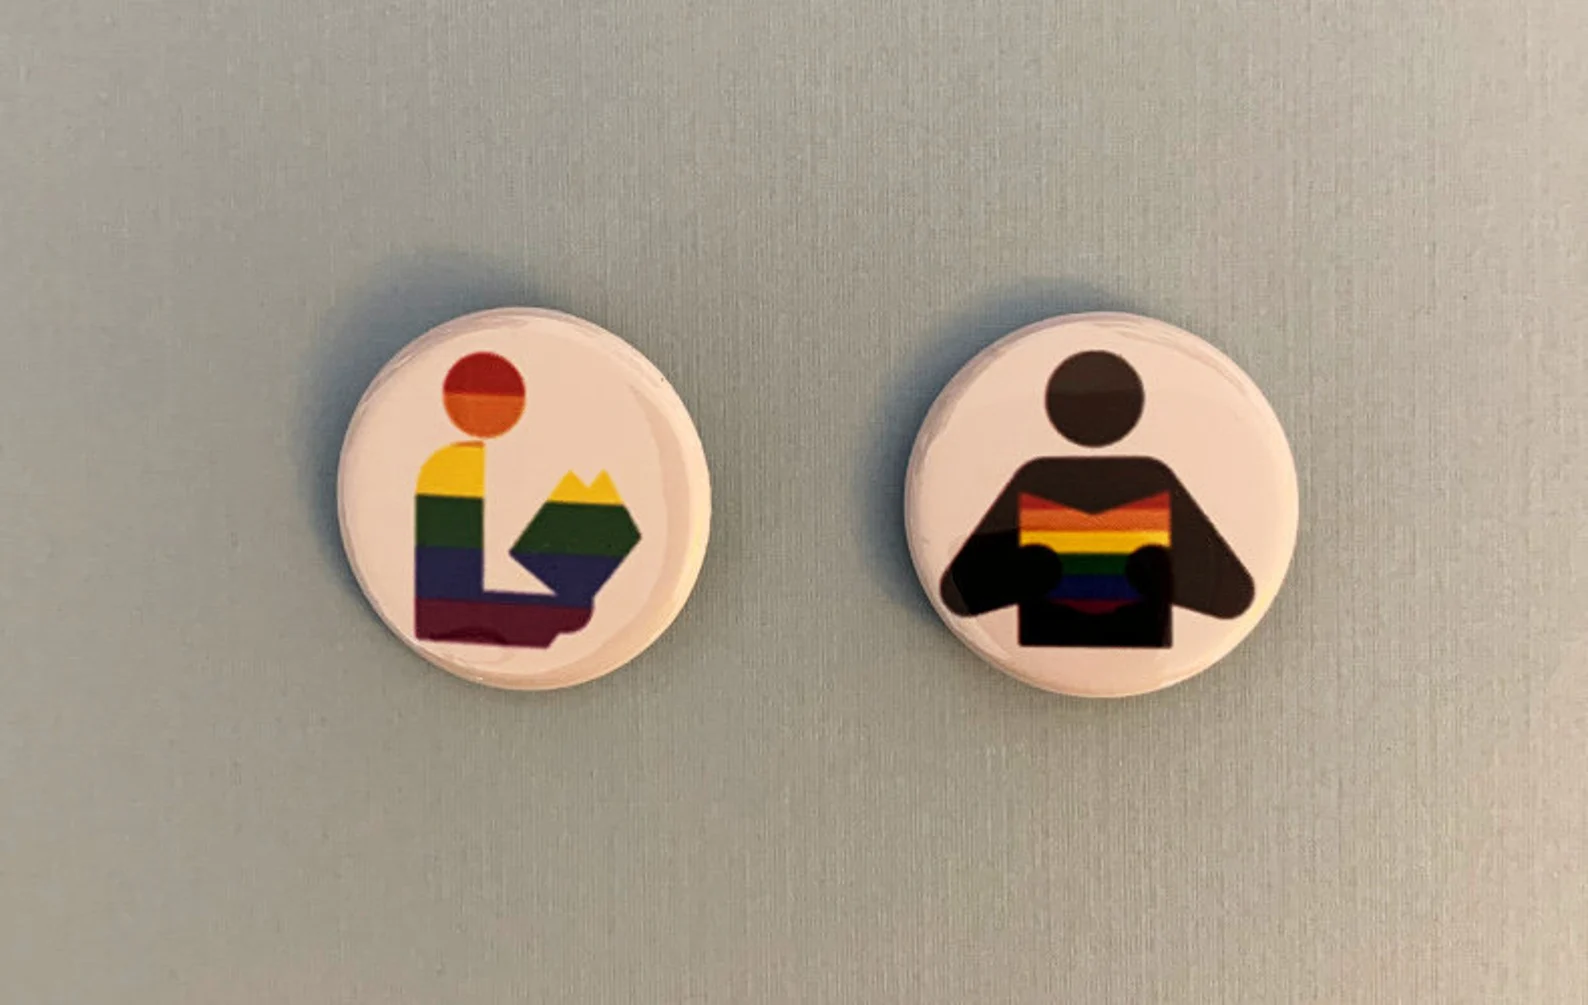 2 buttons in the shape of the library symbol. Both include books in rainbow colors. 